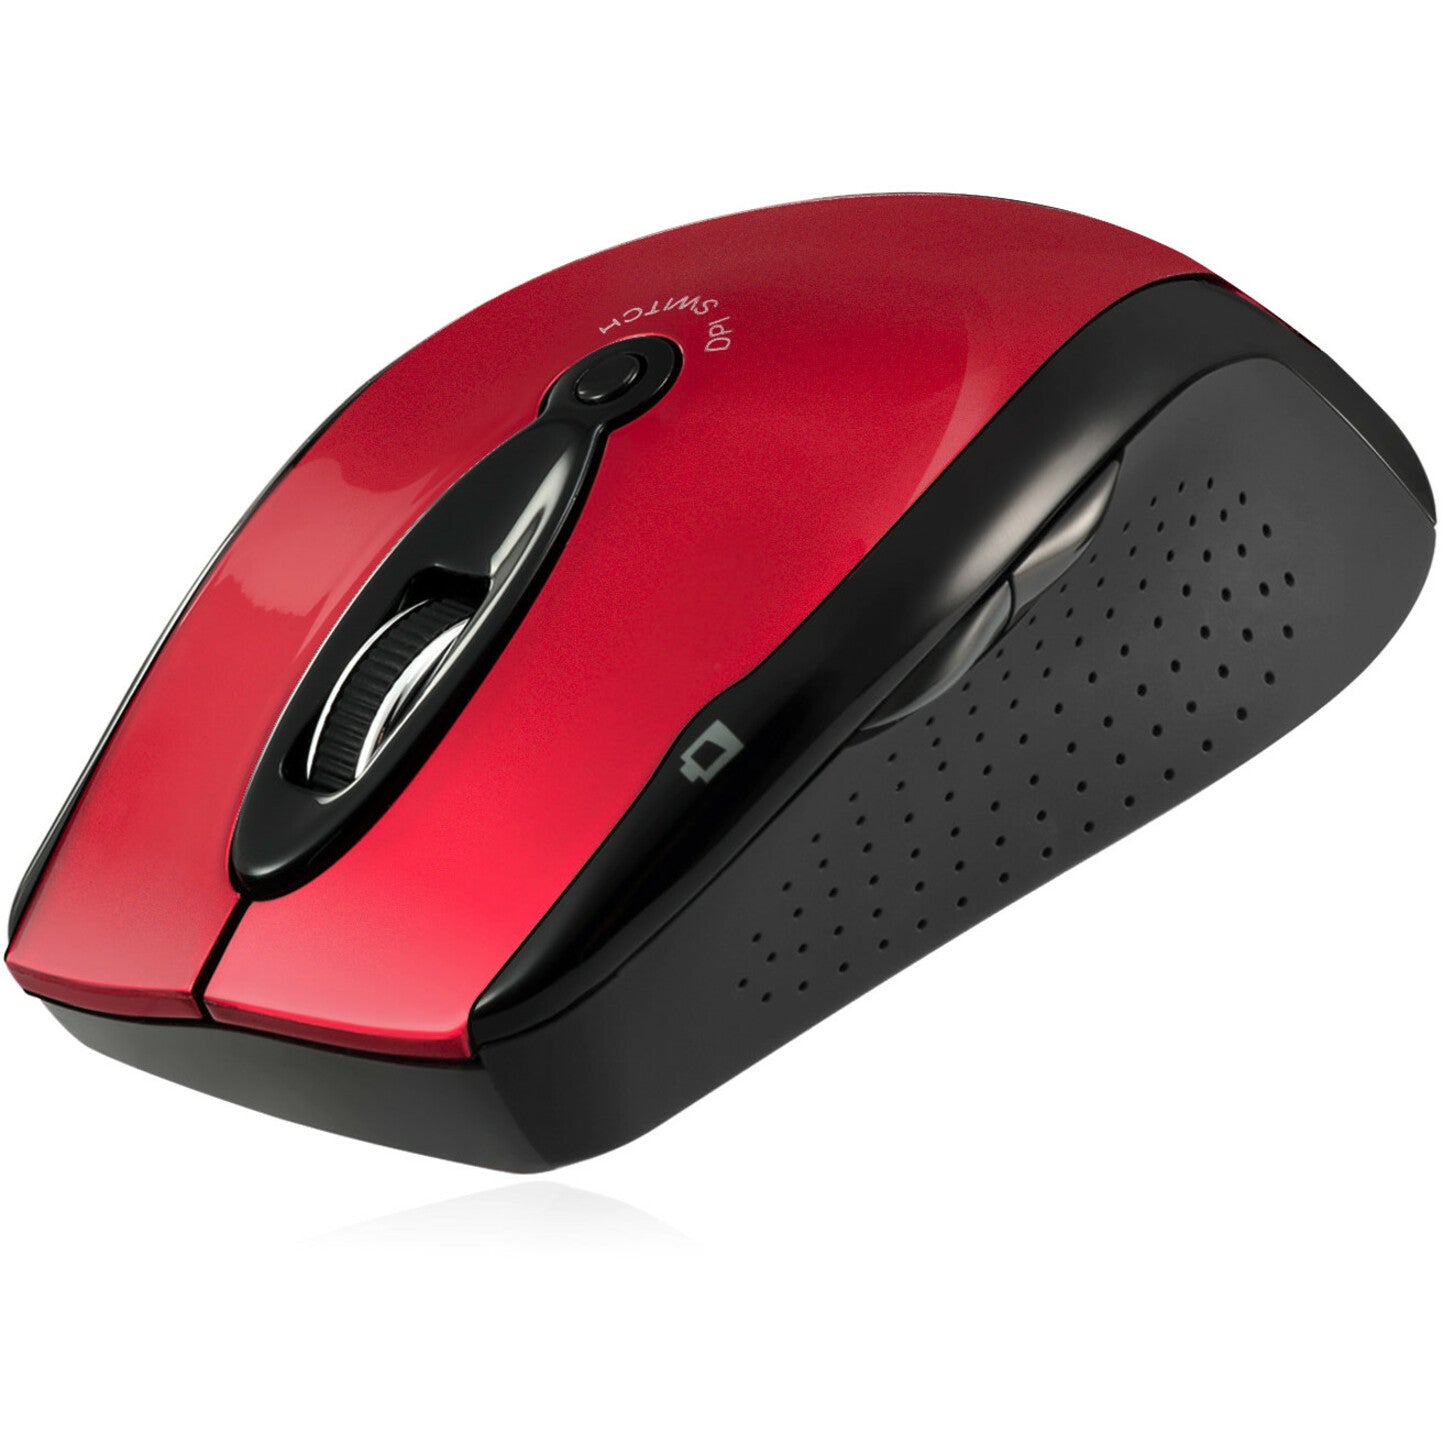 Adesso IMOUSE M20R Wireless Ergonomic Optical Mouse, Red, 2.4 GHz Radio Frequency, 1500 dpi Movement Resolution